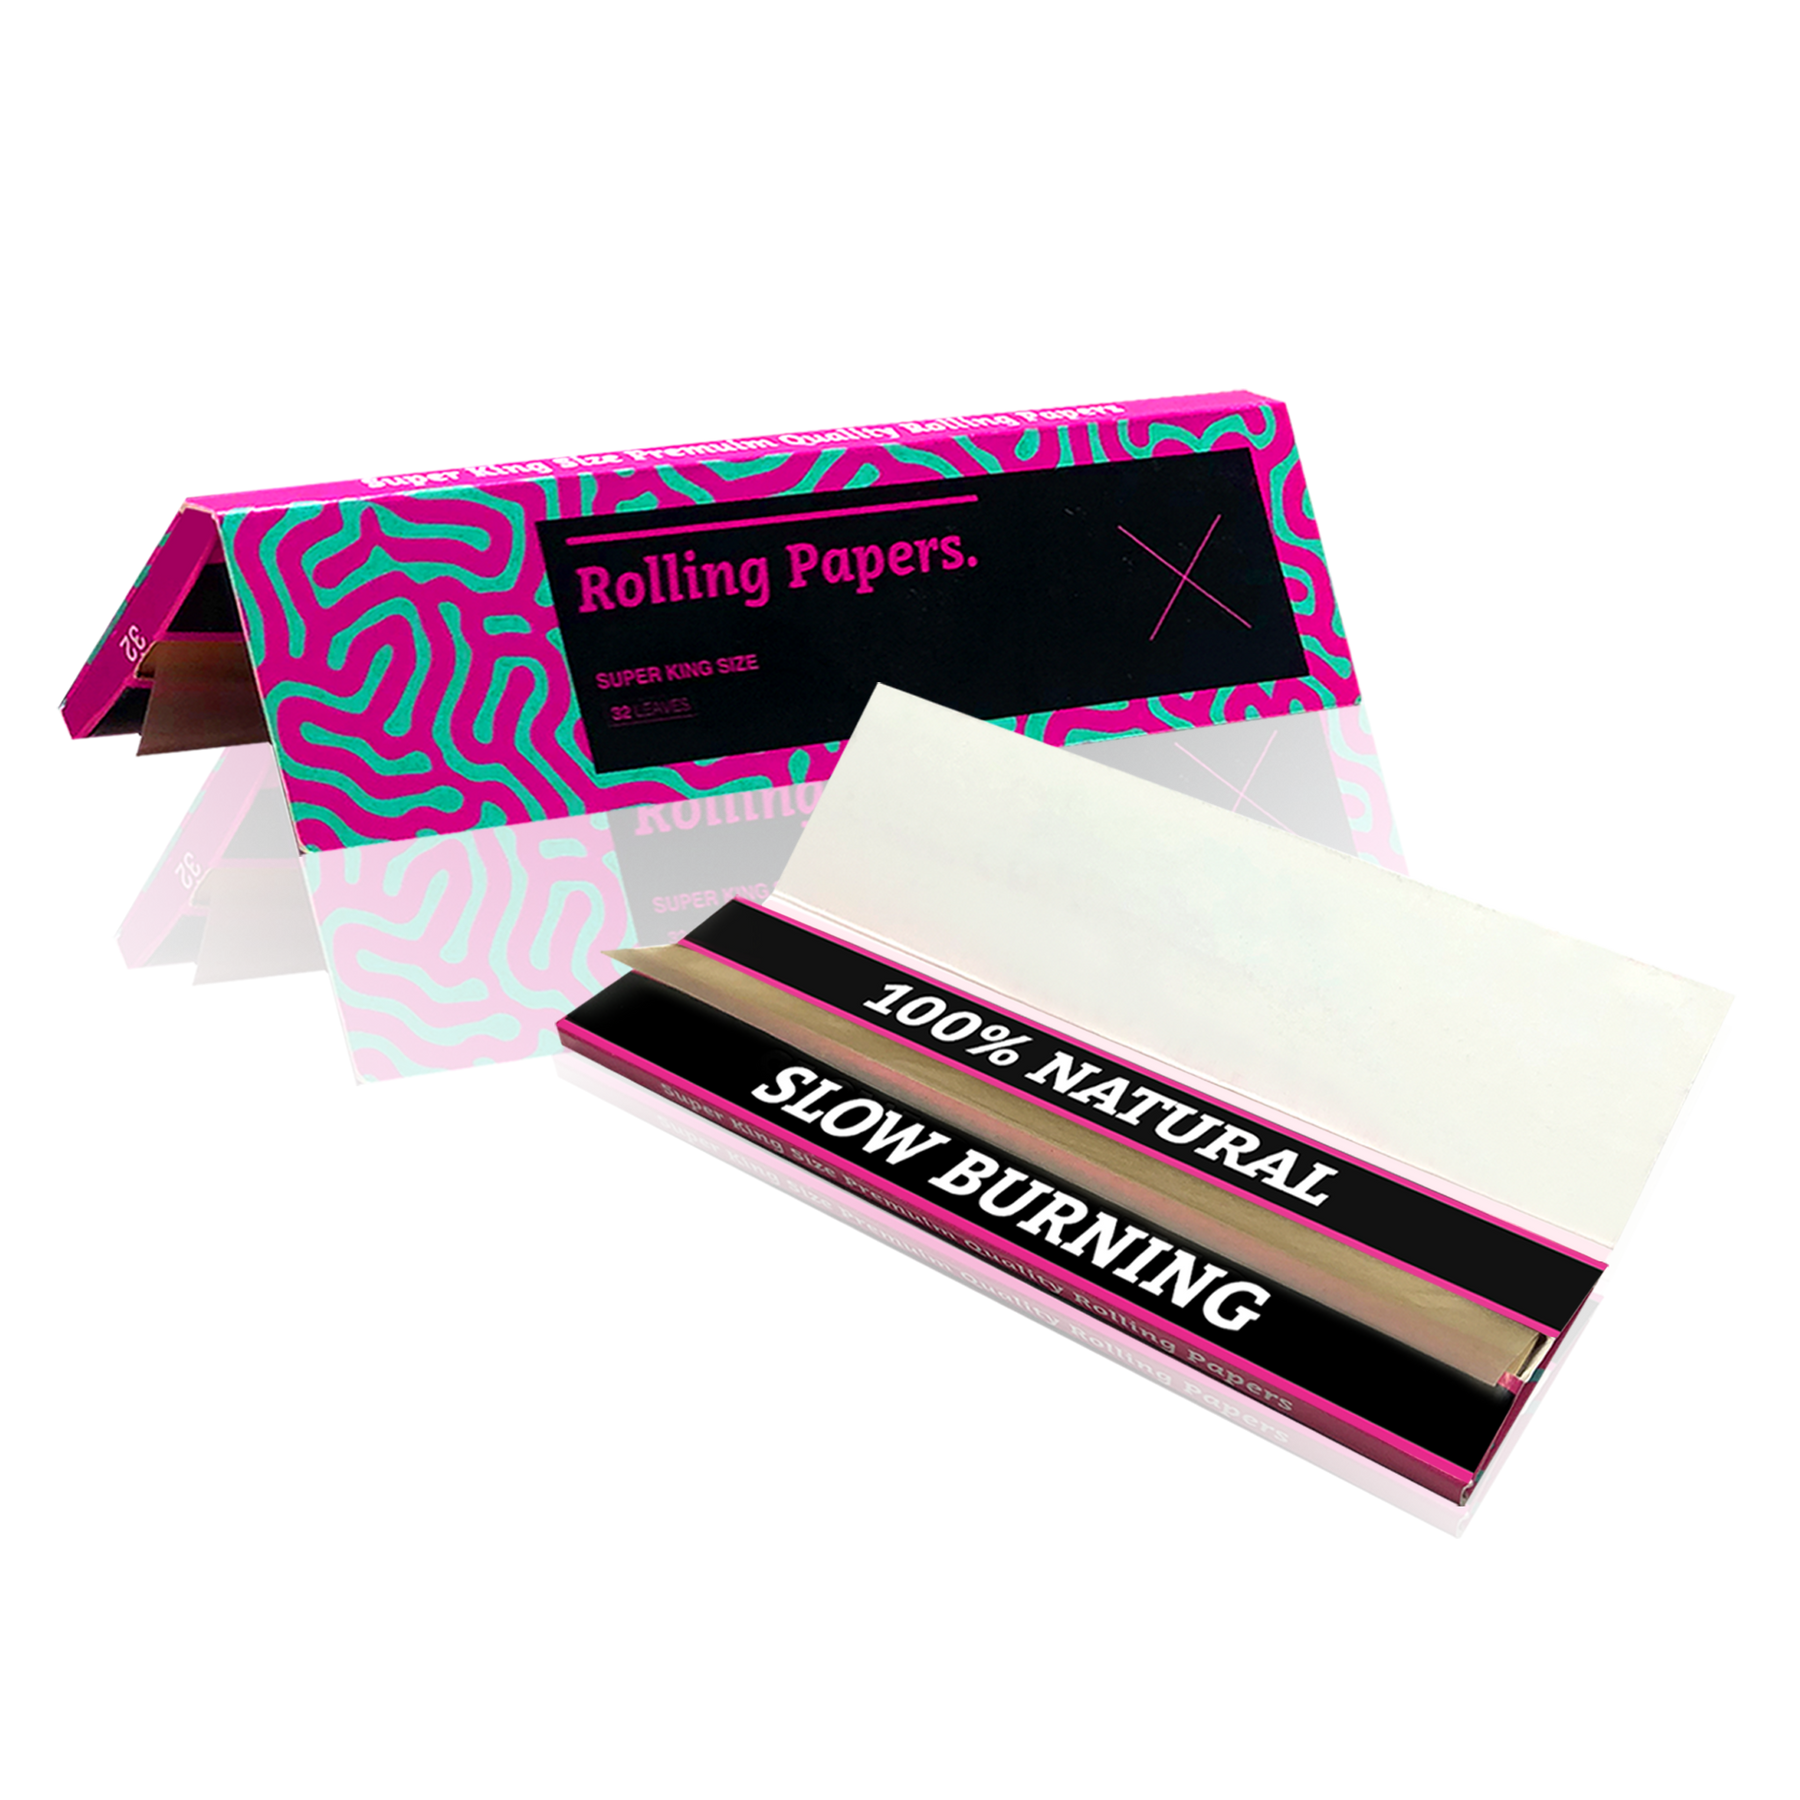 Download Custom Printed Rolling Paper Your Design On Paper Booklet And Display Box Roll Your Own Papers Com